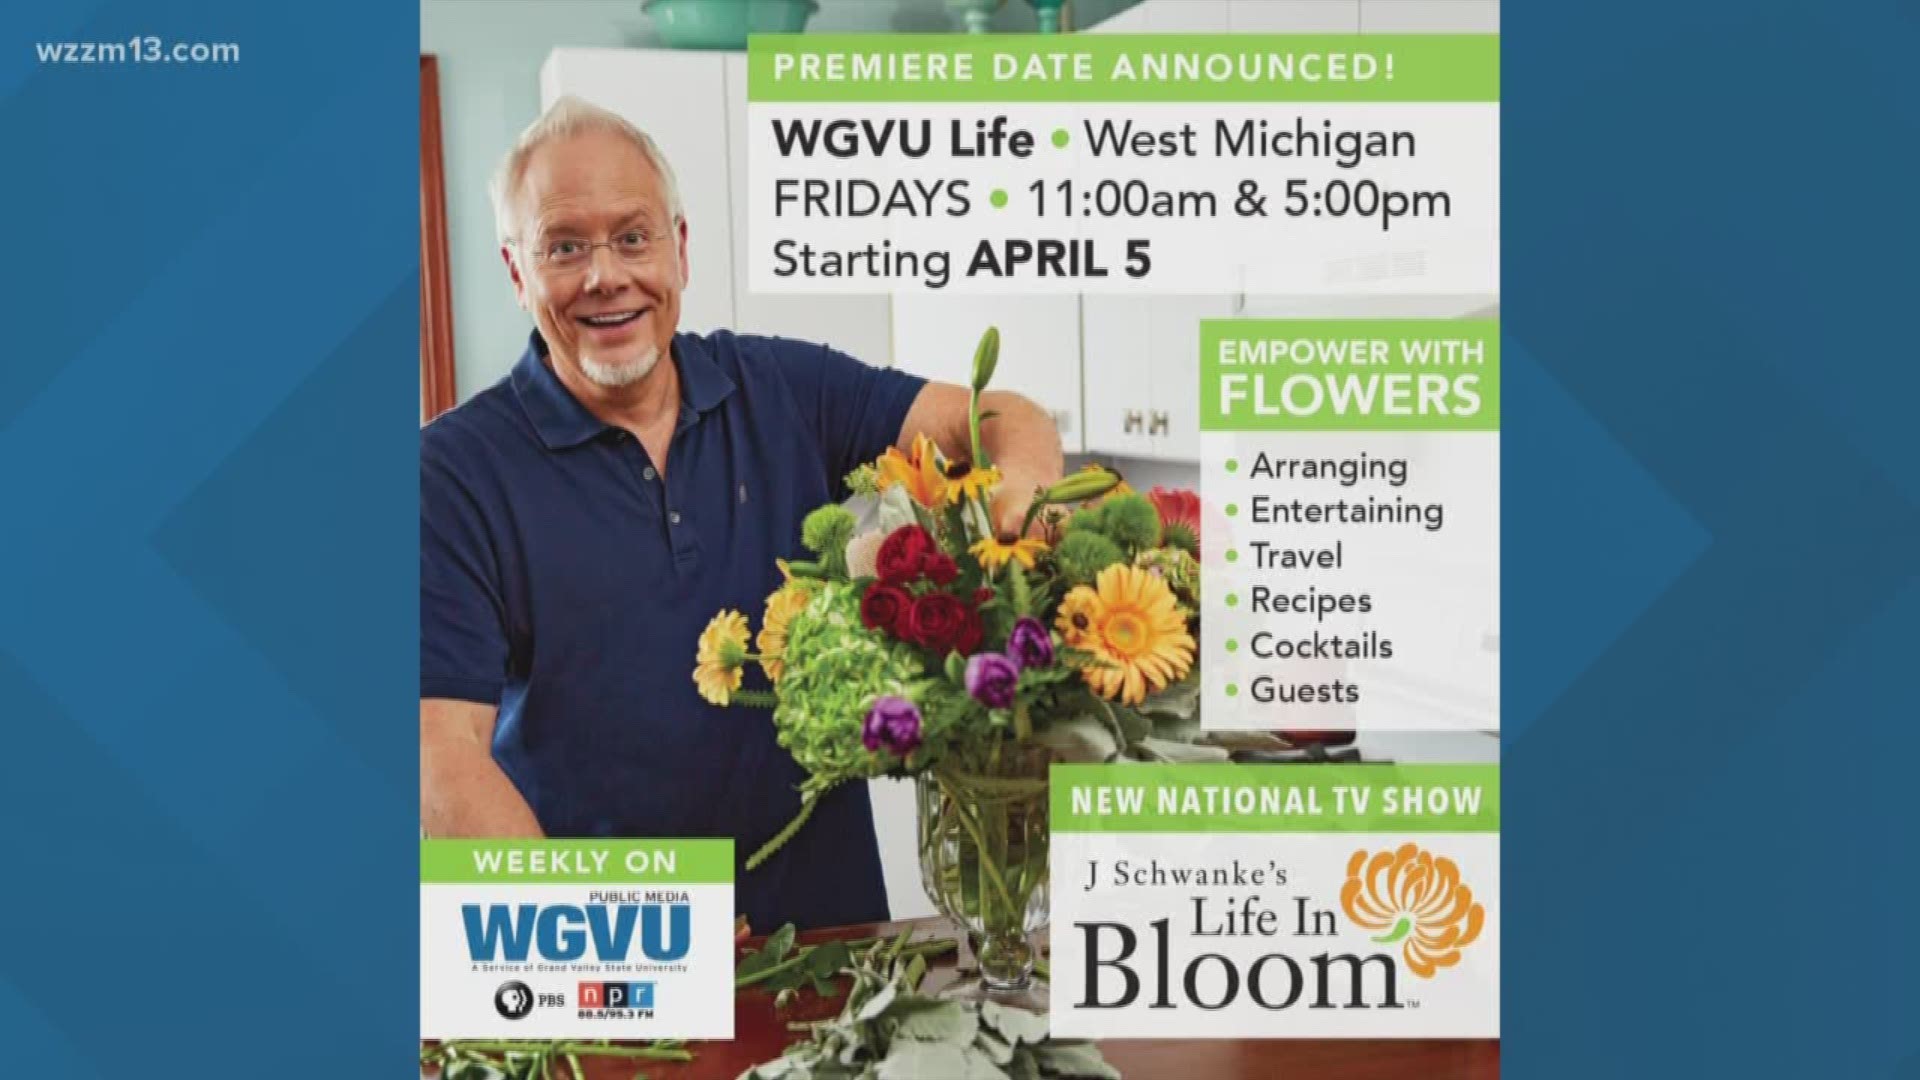 A familiar face is coming to National Public Television. J Schwanke from uBloom.com has a new show. J Schwanke's "Life in Bloom" is premiering soon. In Grand Rapids, the premiere is Friday, April 5.